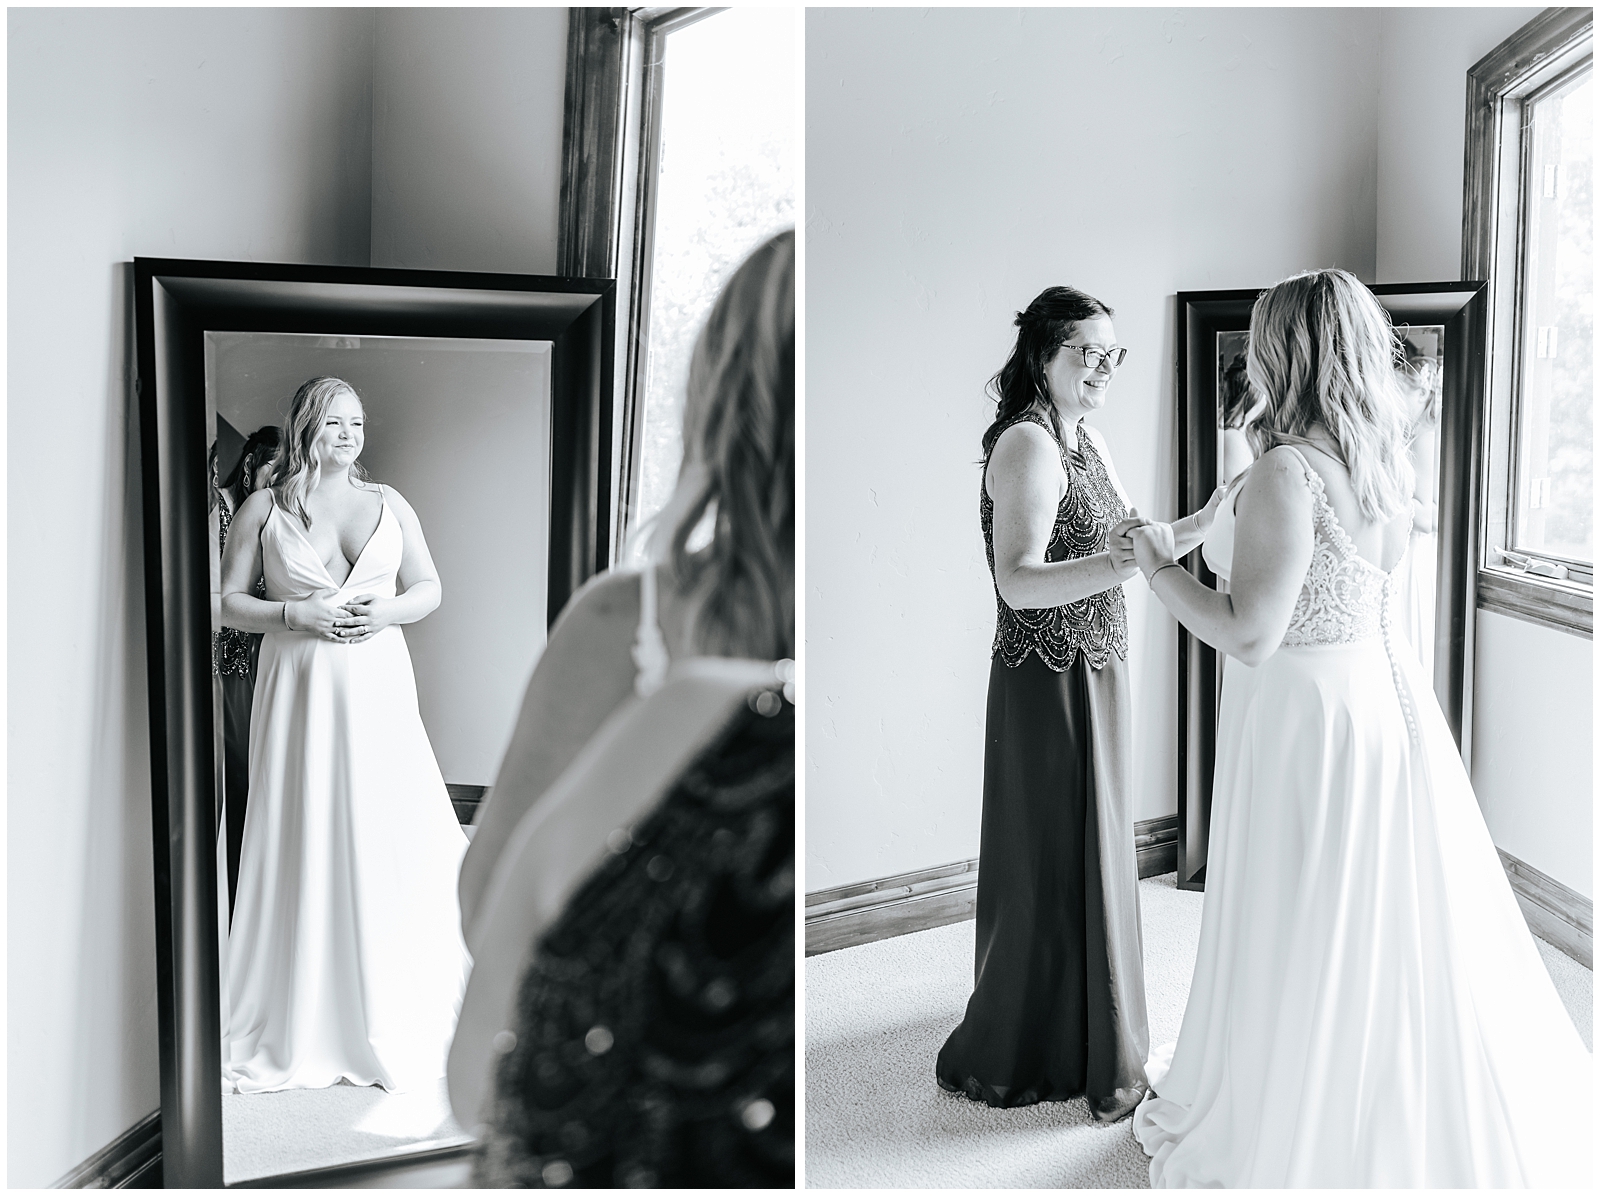 The bride and her mother getting ready on the wedding day